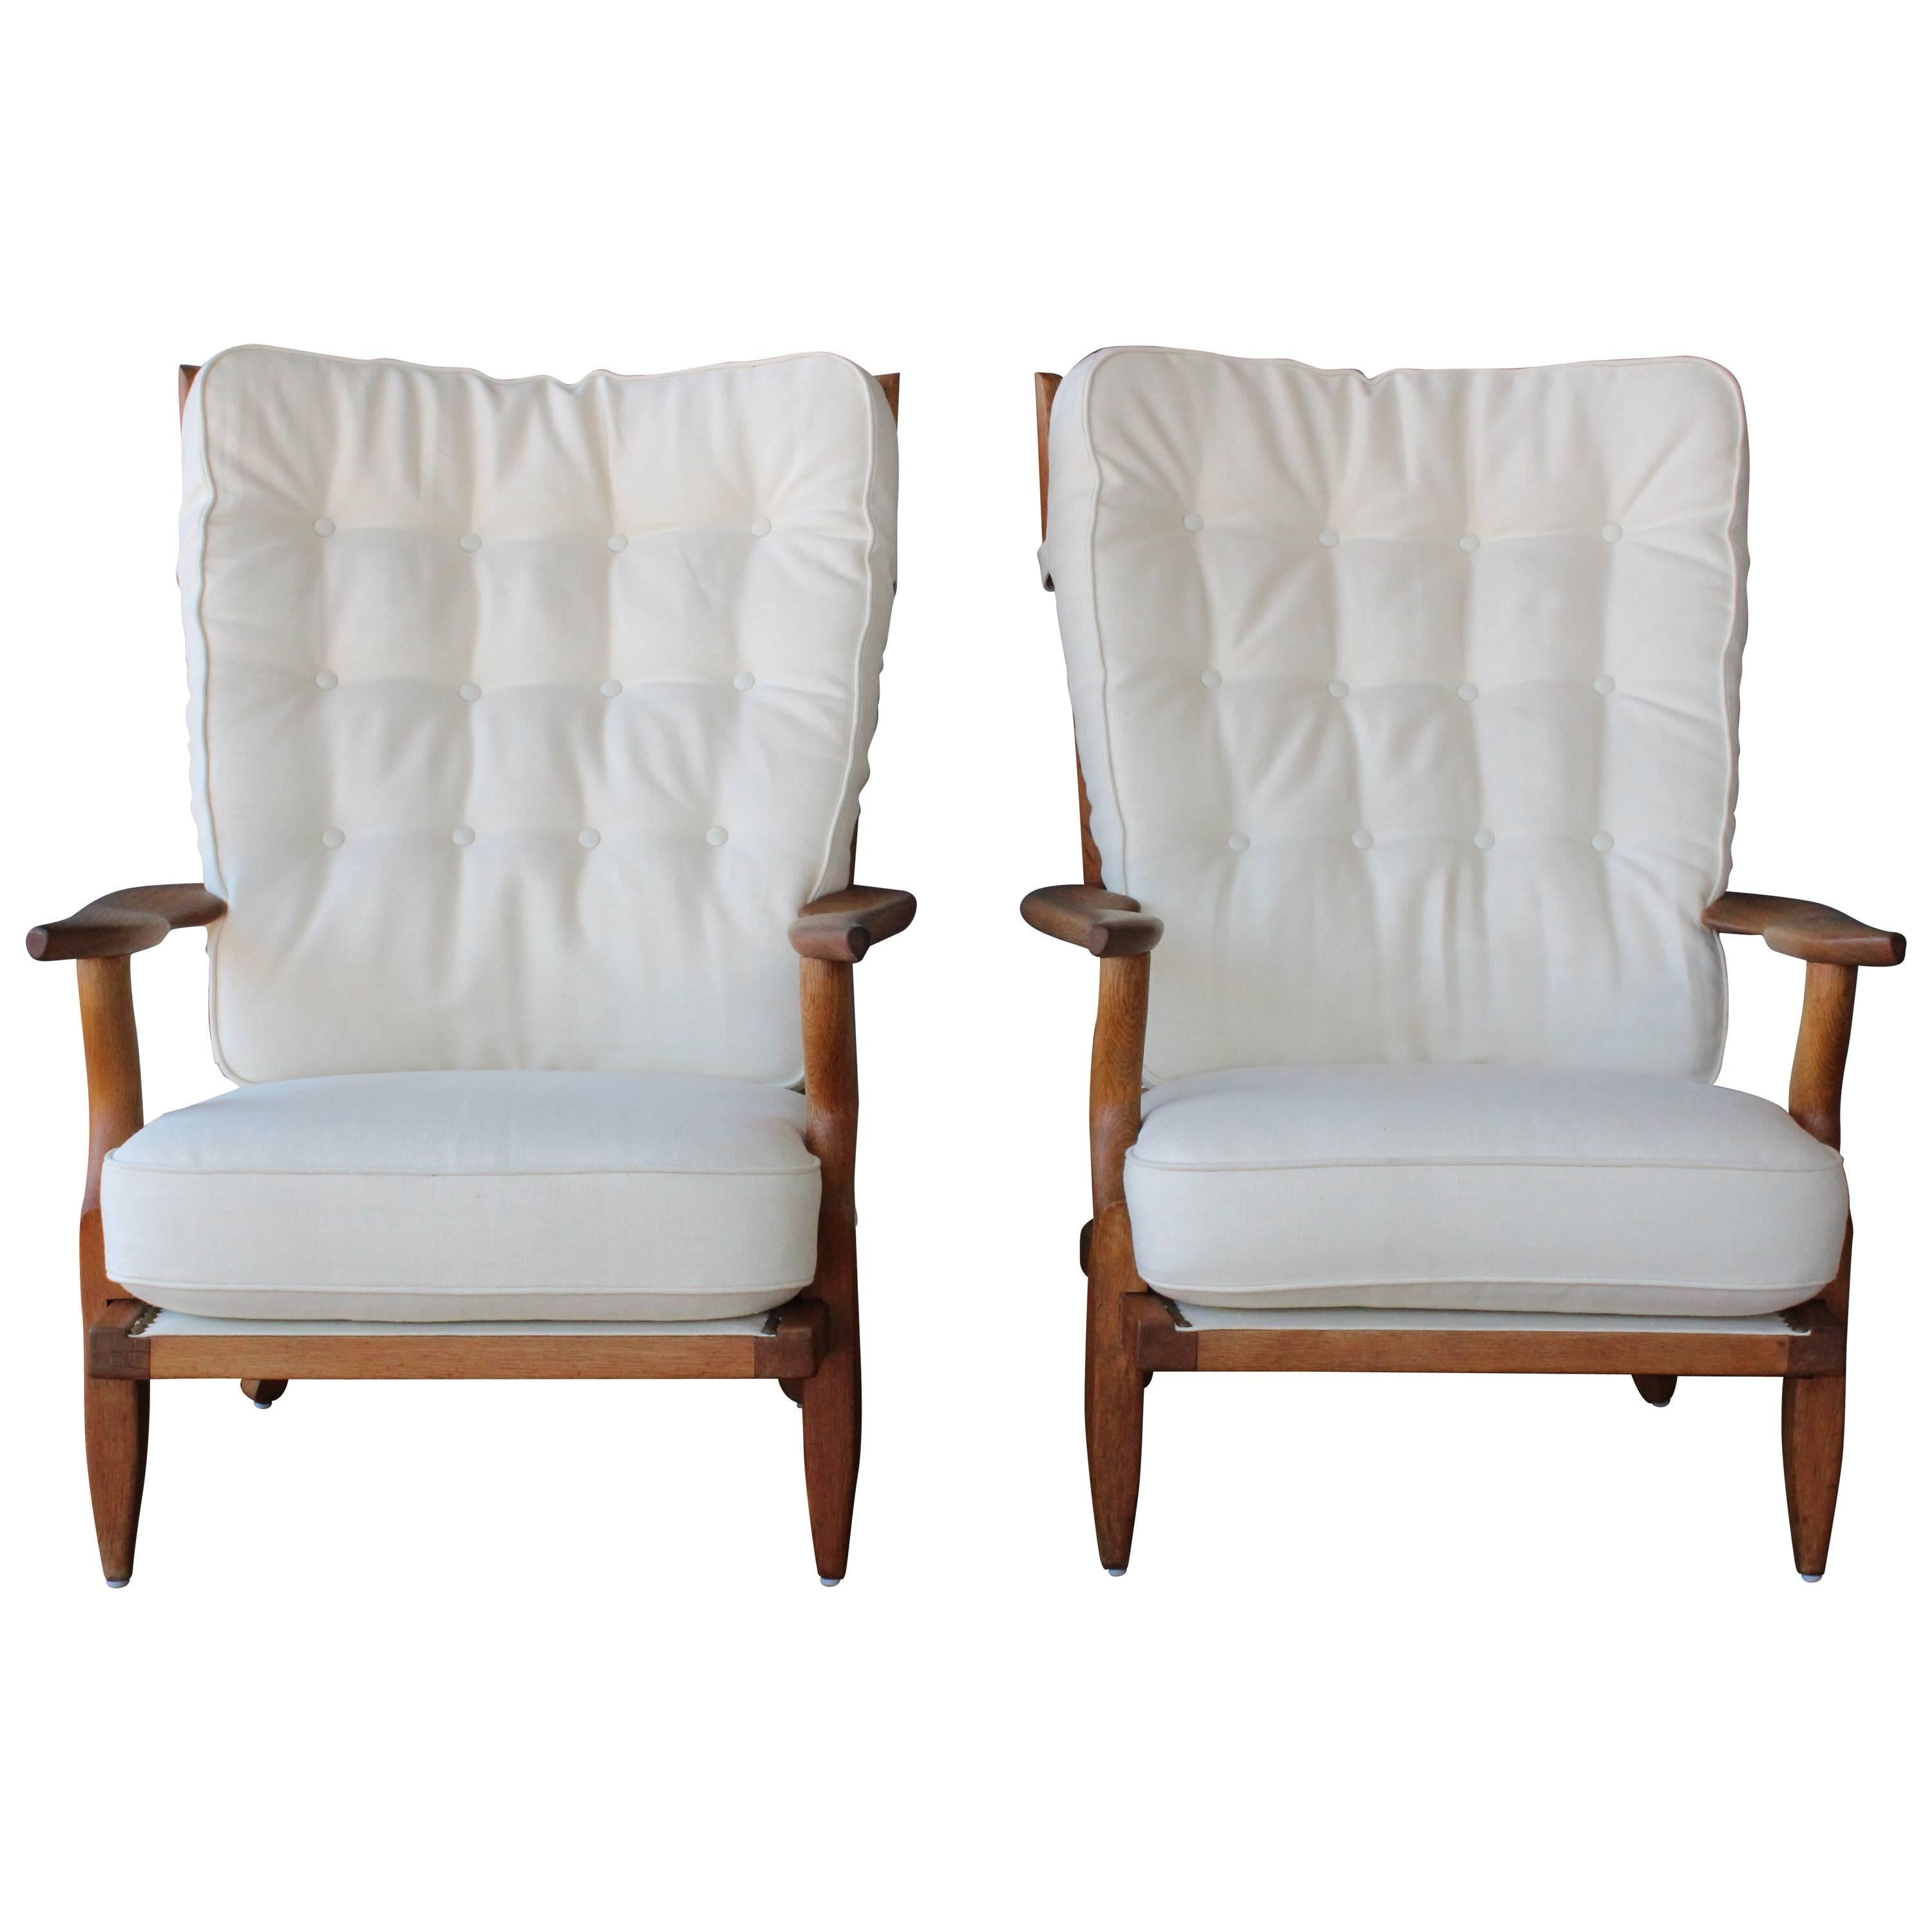 Pair of Guillerme et Chambron 'Grand Repos' Armchairs, 1960s, France